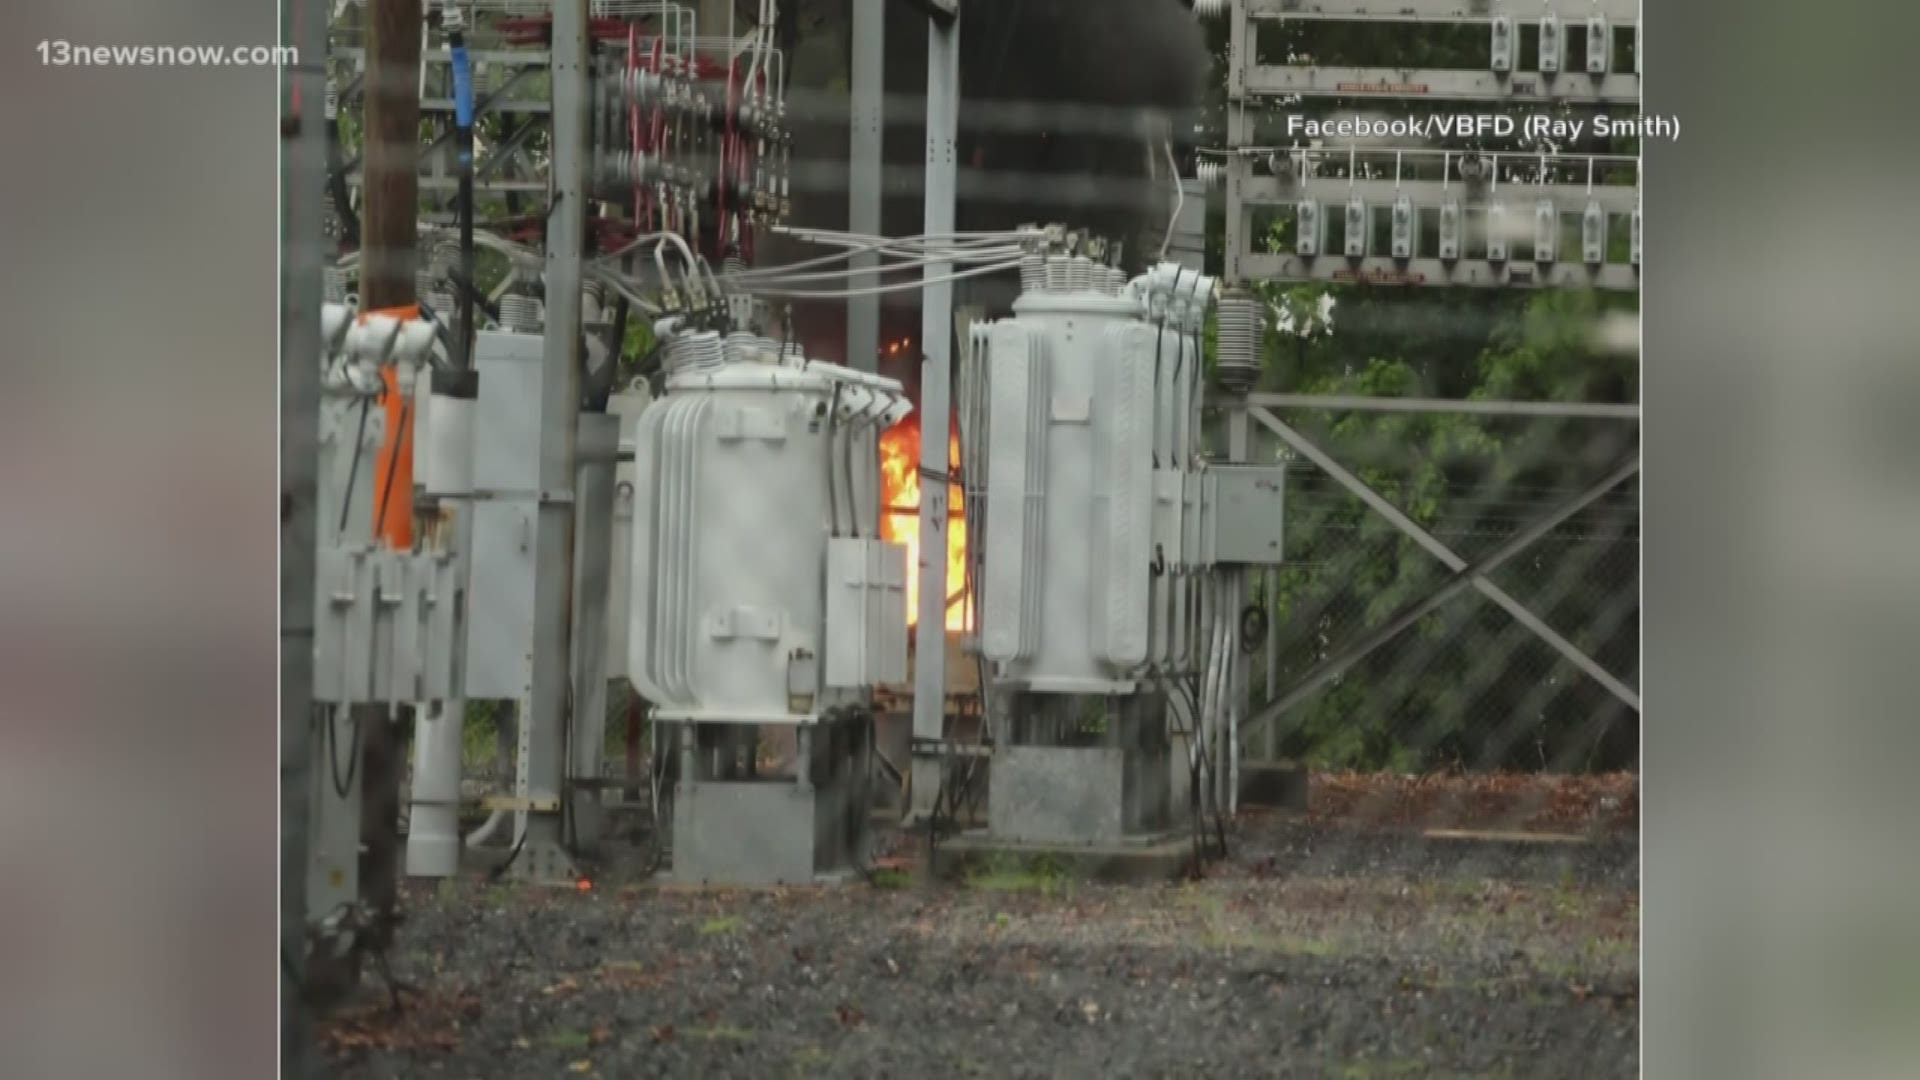 A fire damaged a Dominion Energy circuit breaker as storms rolled through the area Sunday. Based on the timing crews determined lightning didn't cause the fire. They're still investigating what caused the fire.